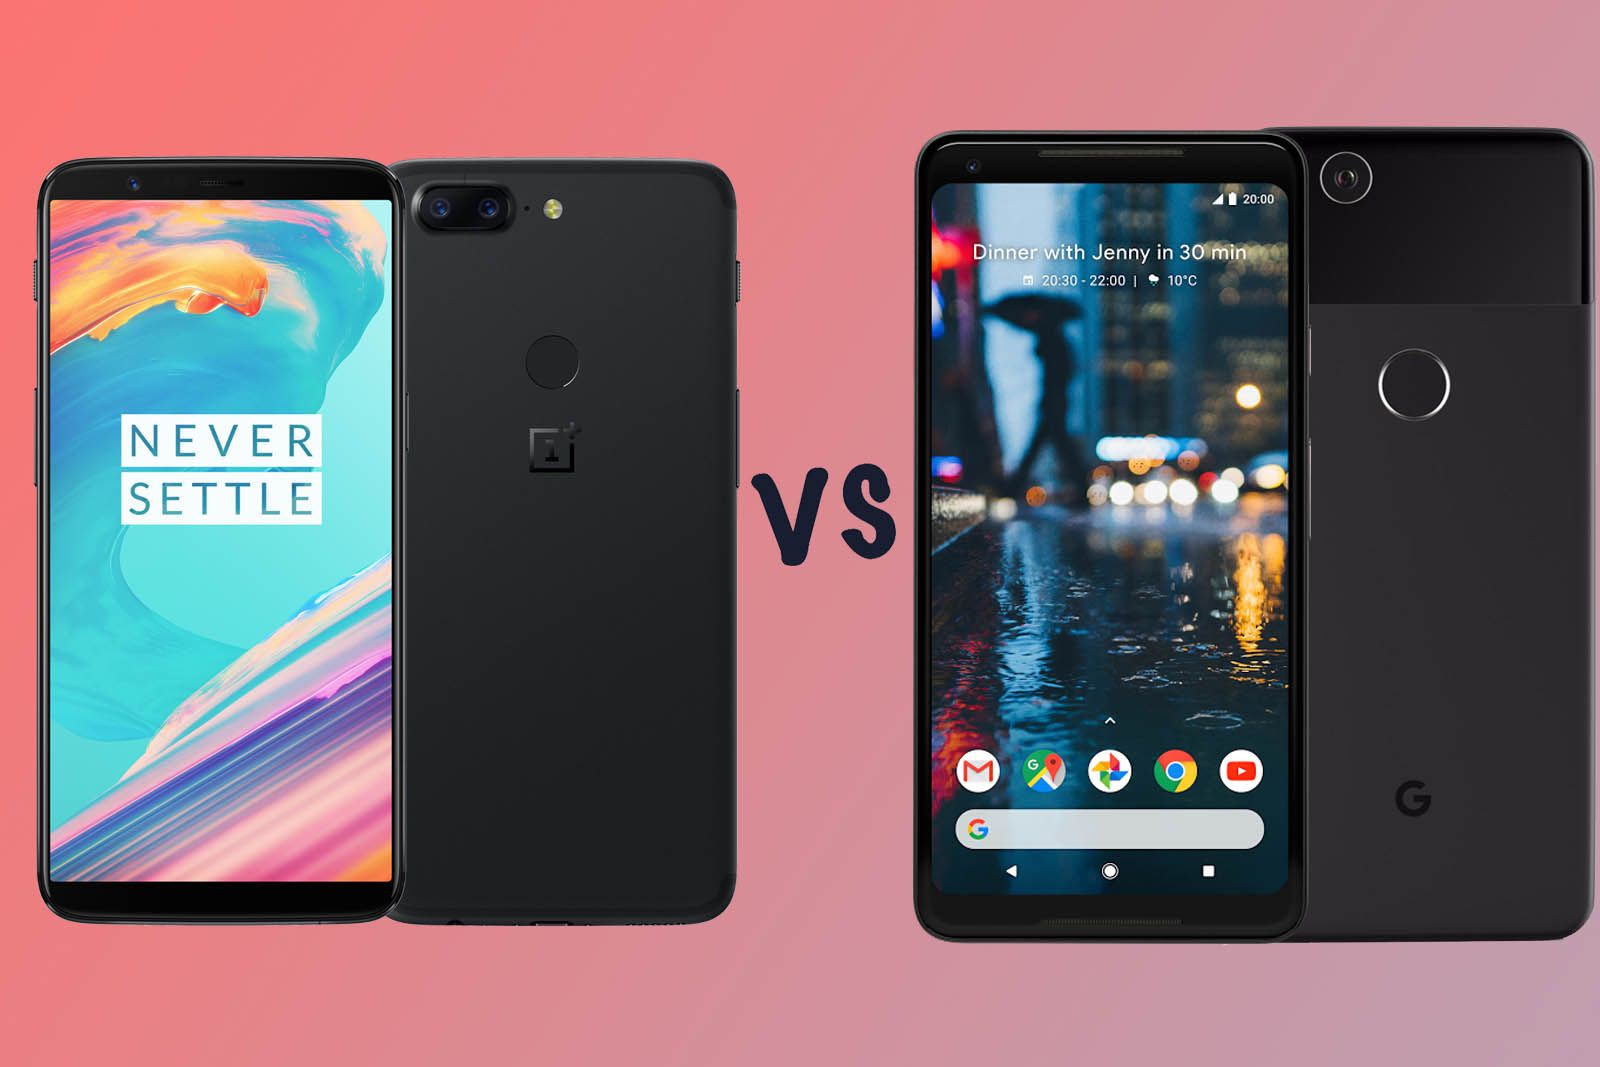 OnePlus 5T vs Google Pixel 2 XL Whats the difference image 1